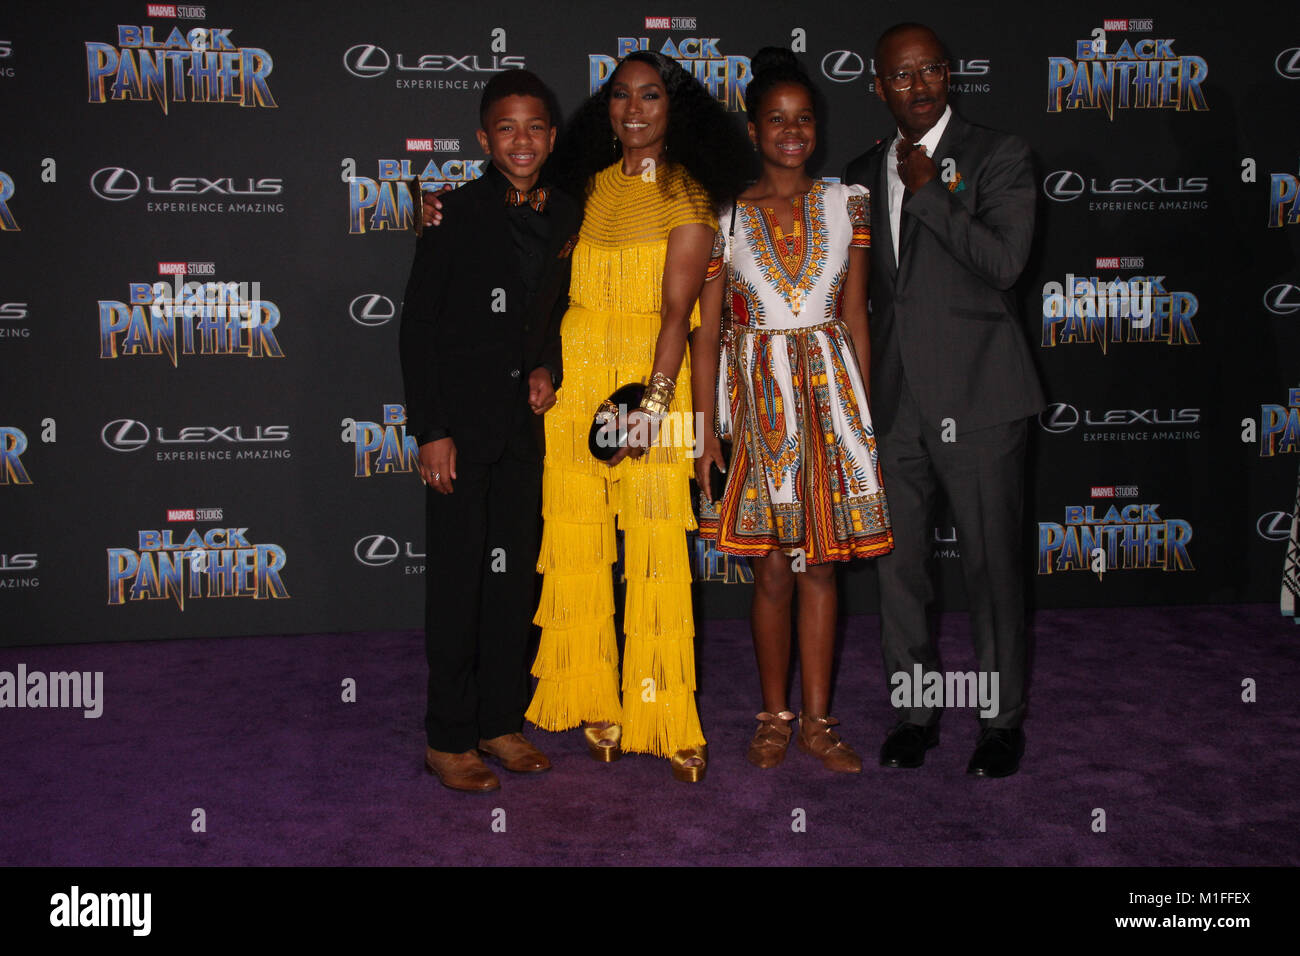 Slater Vance, Angela Bassett, Bronwyn Vance,  Courtney B. Vance  01/29/2018 The World Premiere of 'Black Panther' held at The Dolby Theatre in Los Angeles, CA Photo by Izumi Hasegawa / HollywoodNewsWire.co Stock Photo